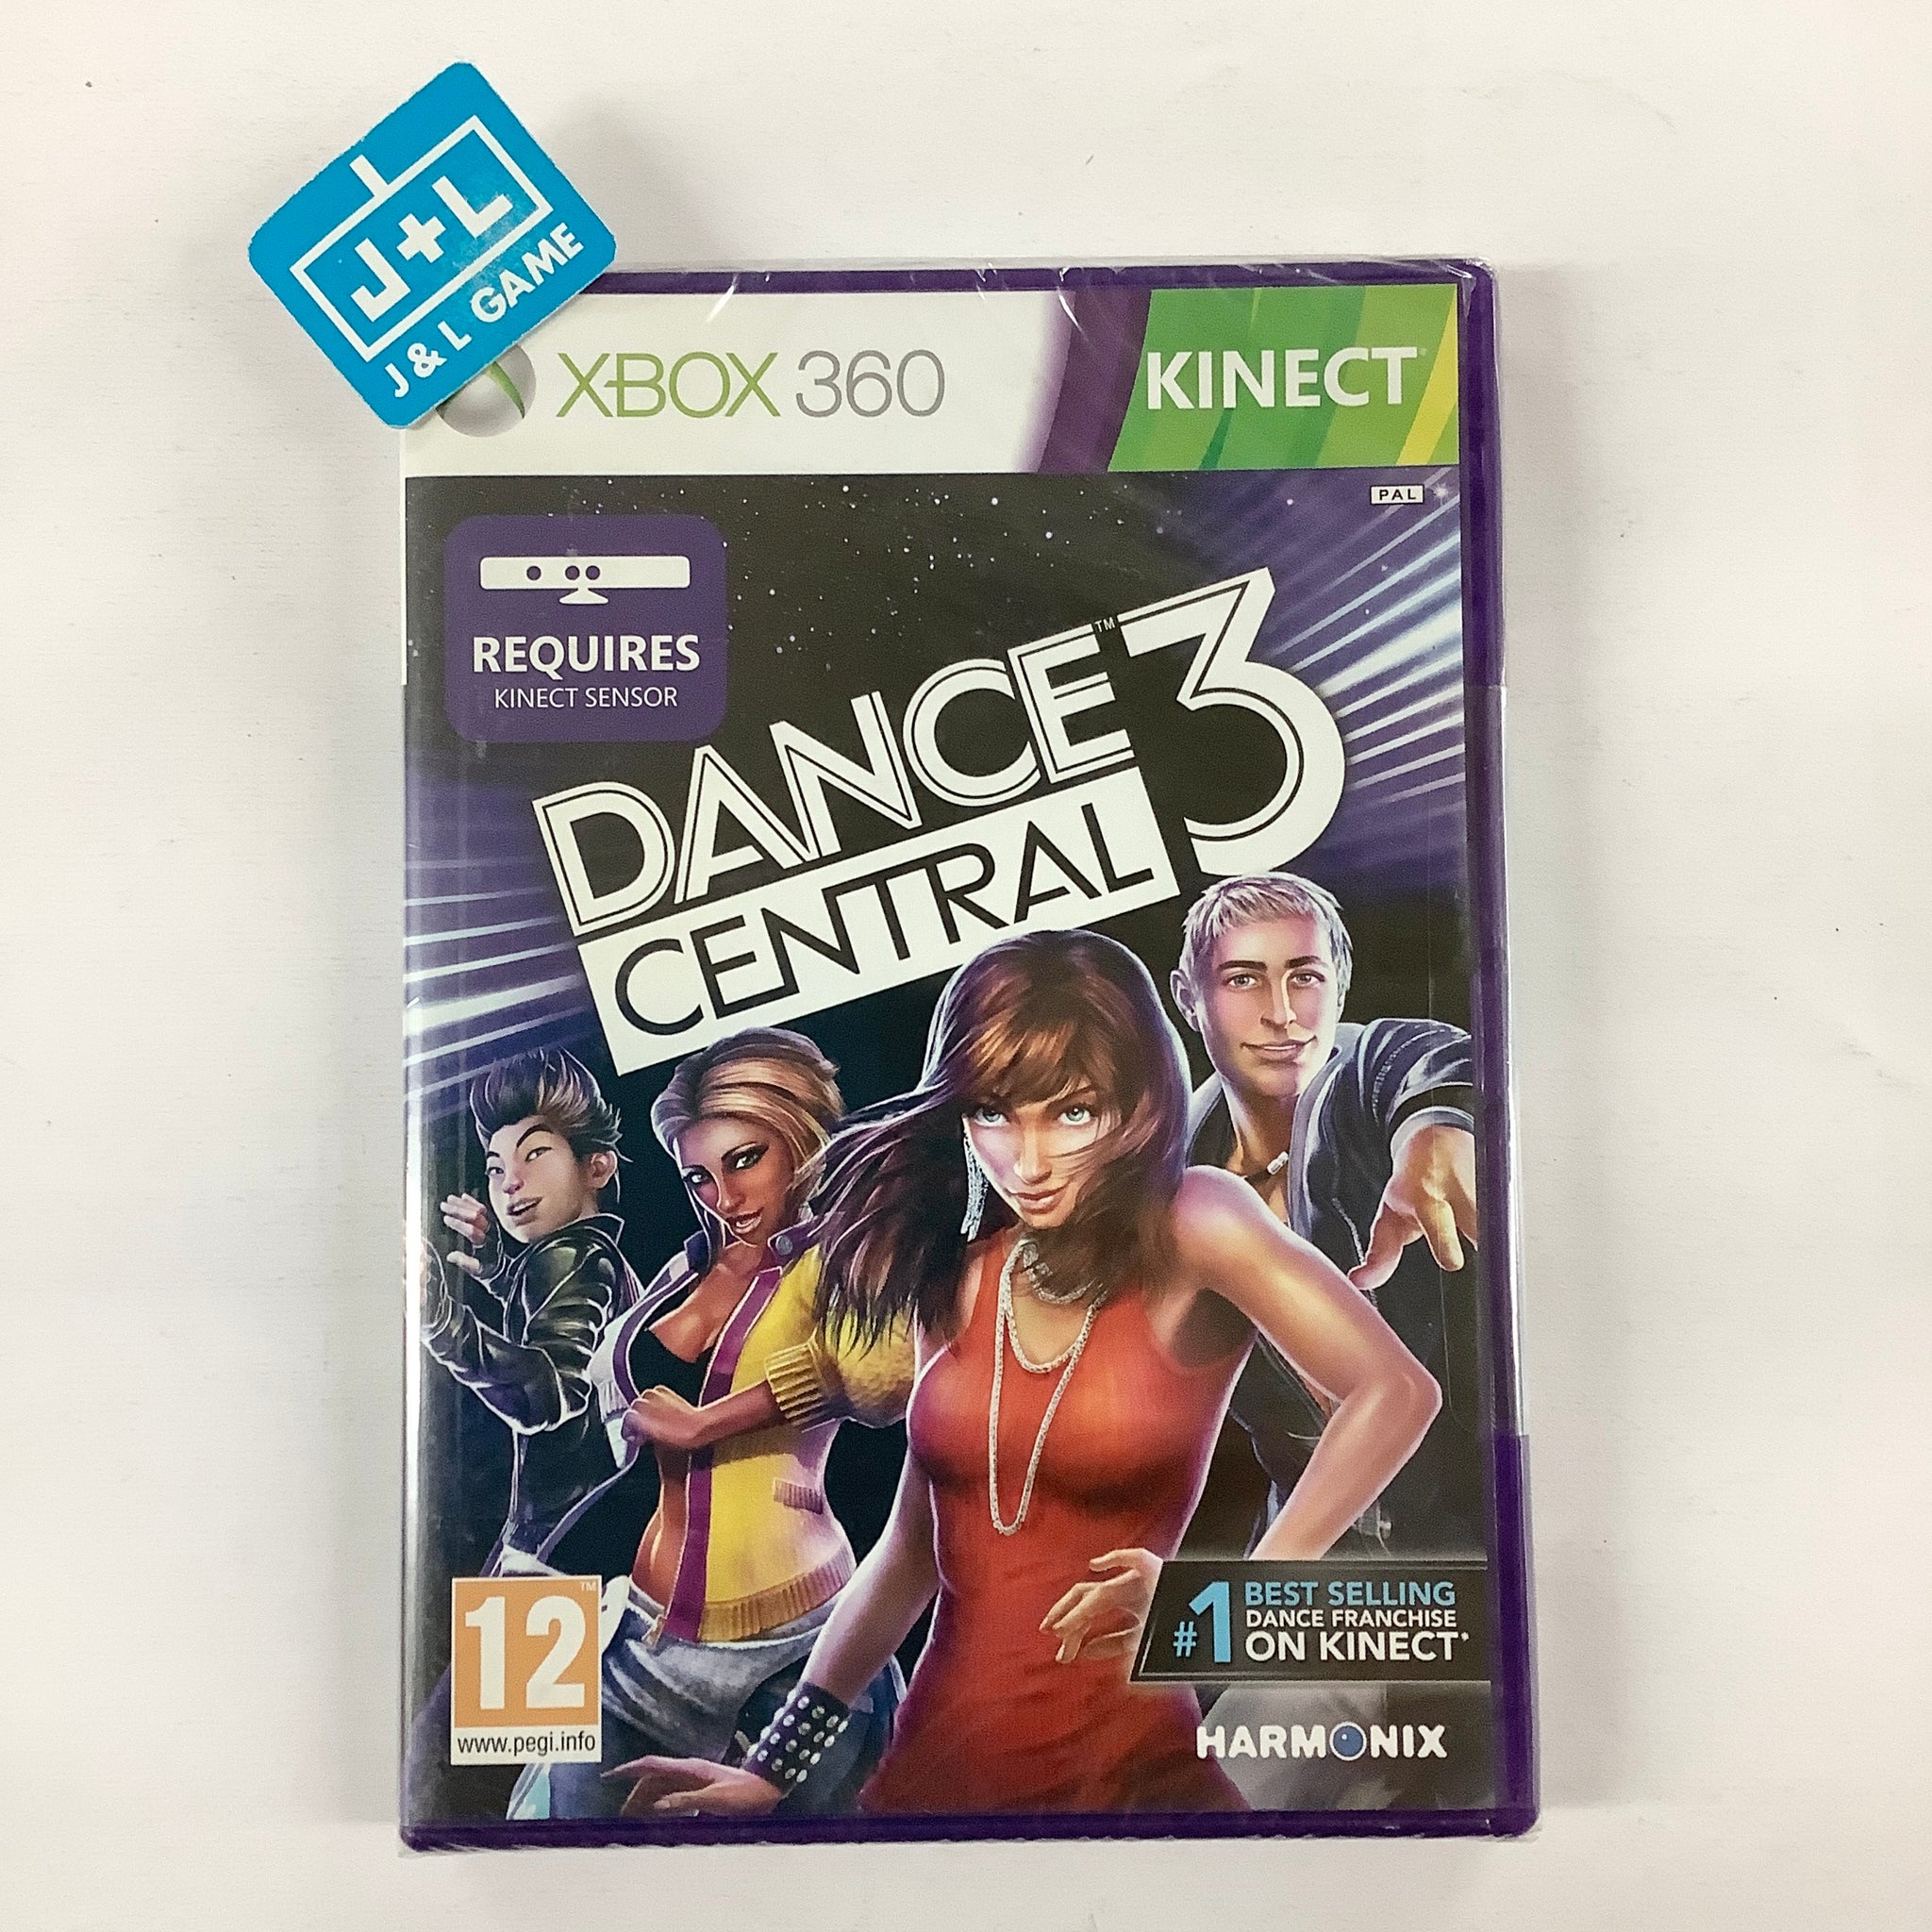 Xbox 360 game lot of 4 Kinect video games; Nickelodeon Dance